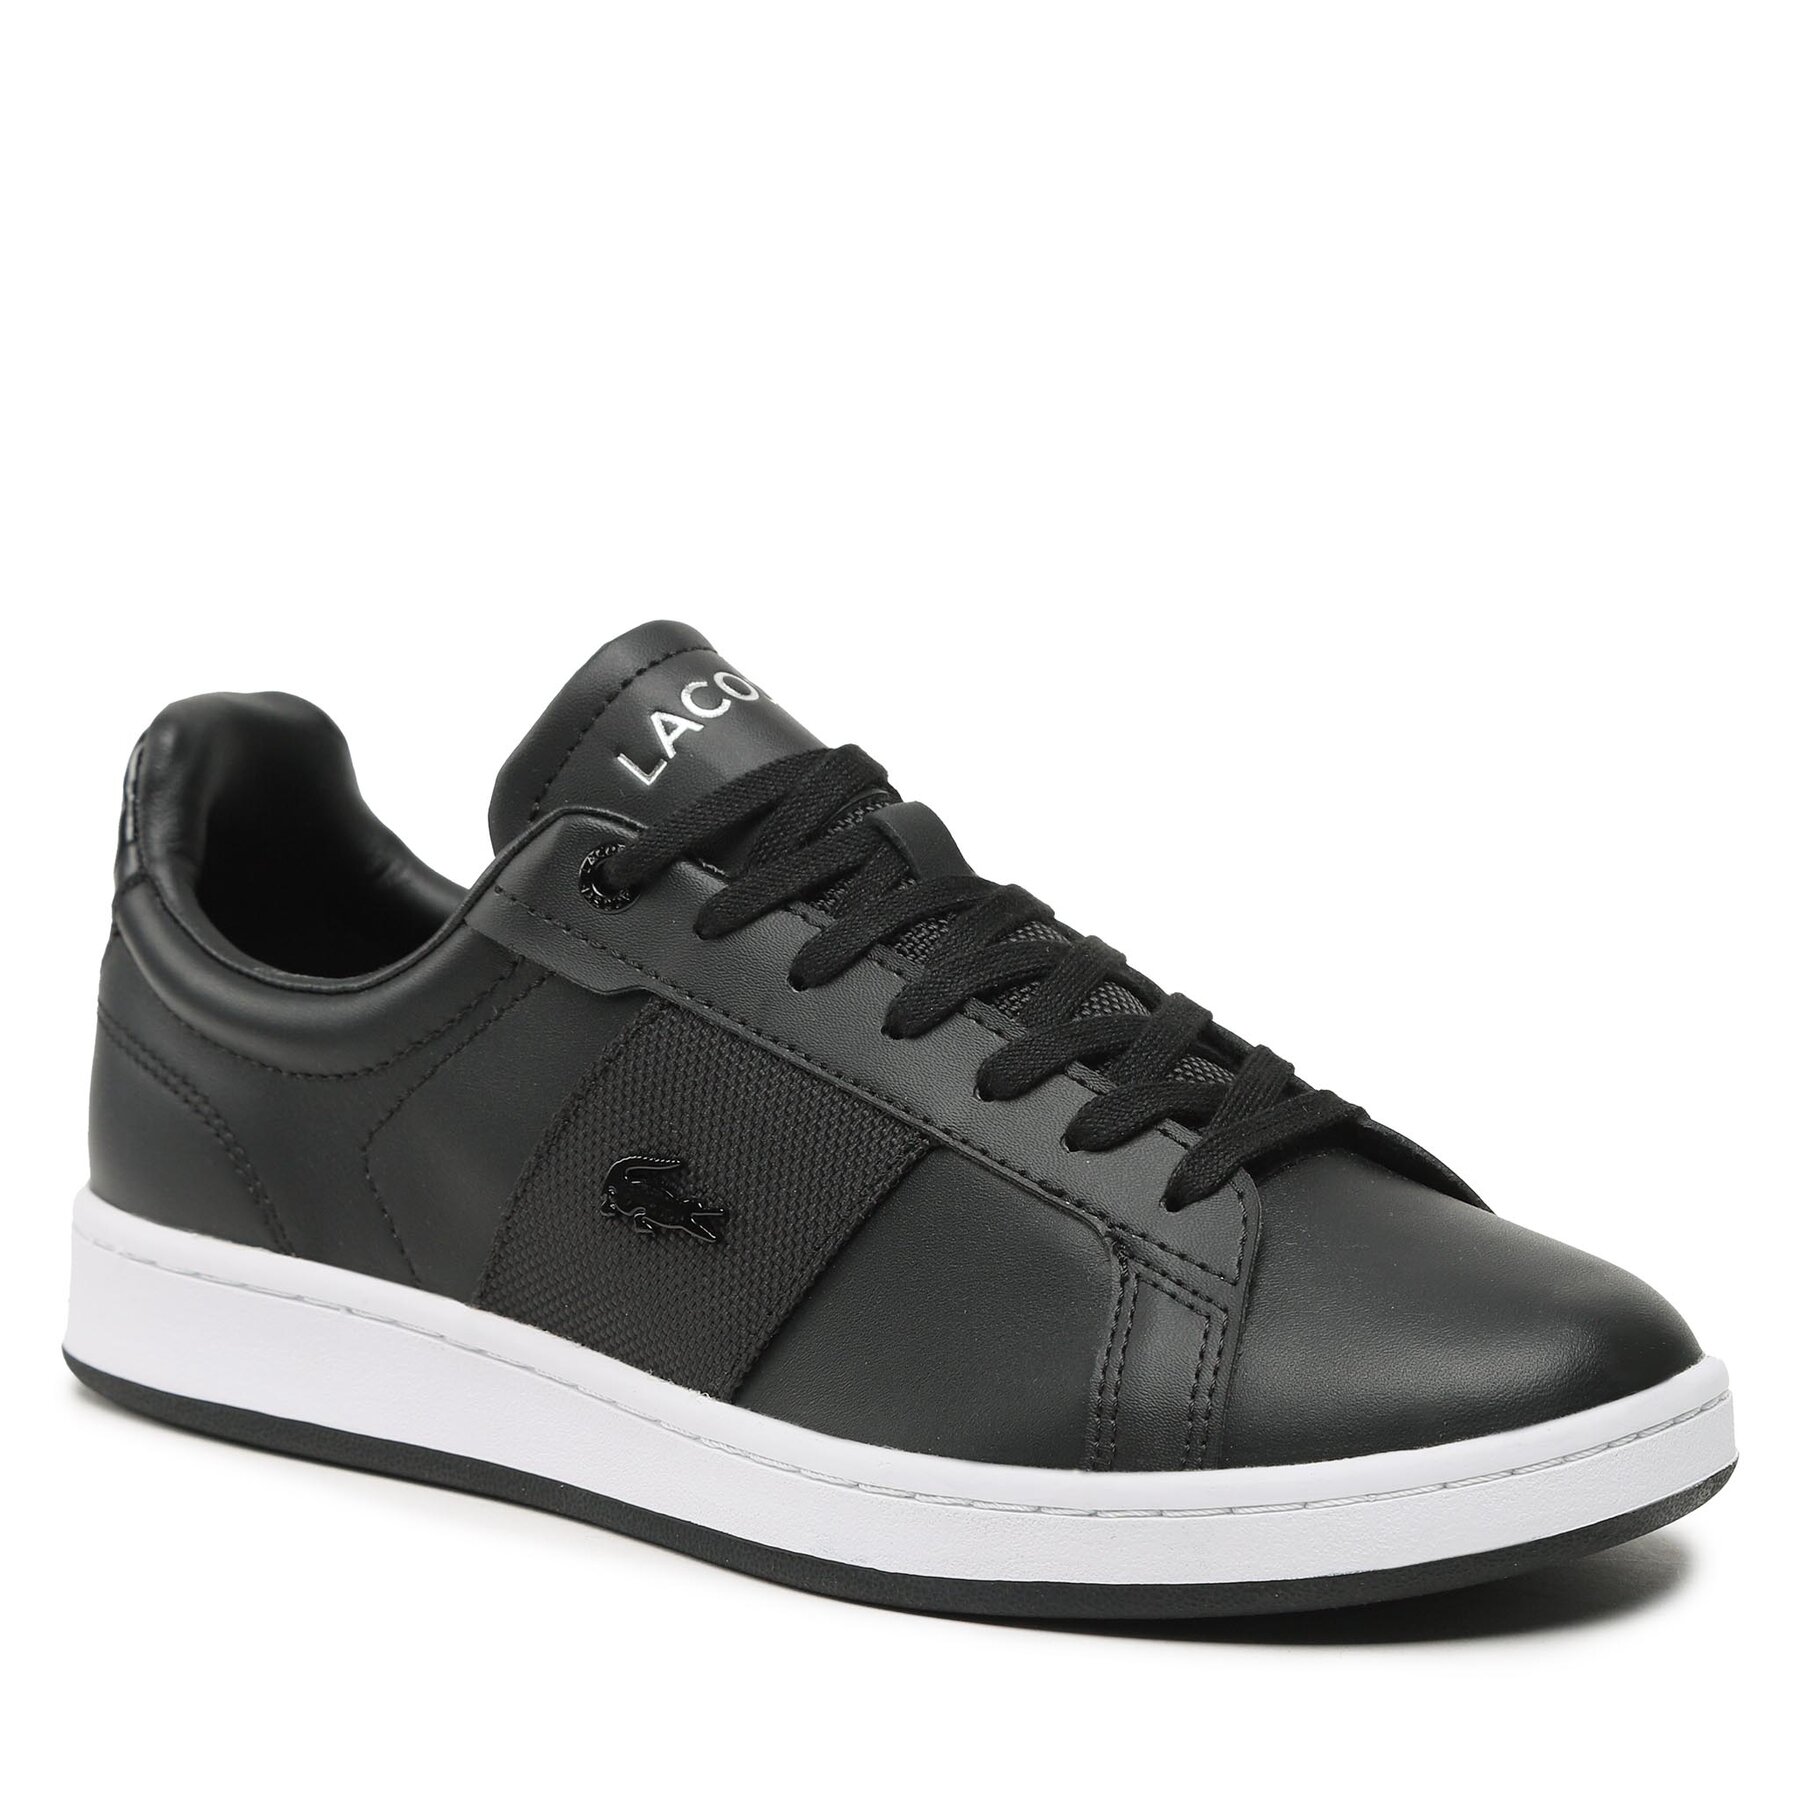 Sneakers Lacoste Carnaby Pro Cgr 123 3 Sma 745SMA0046312 Blk/Wht 123 imagine 2022 reducere